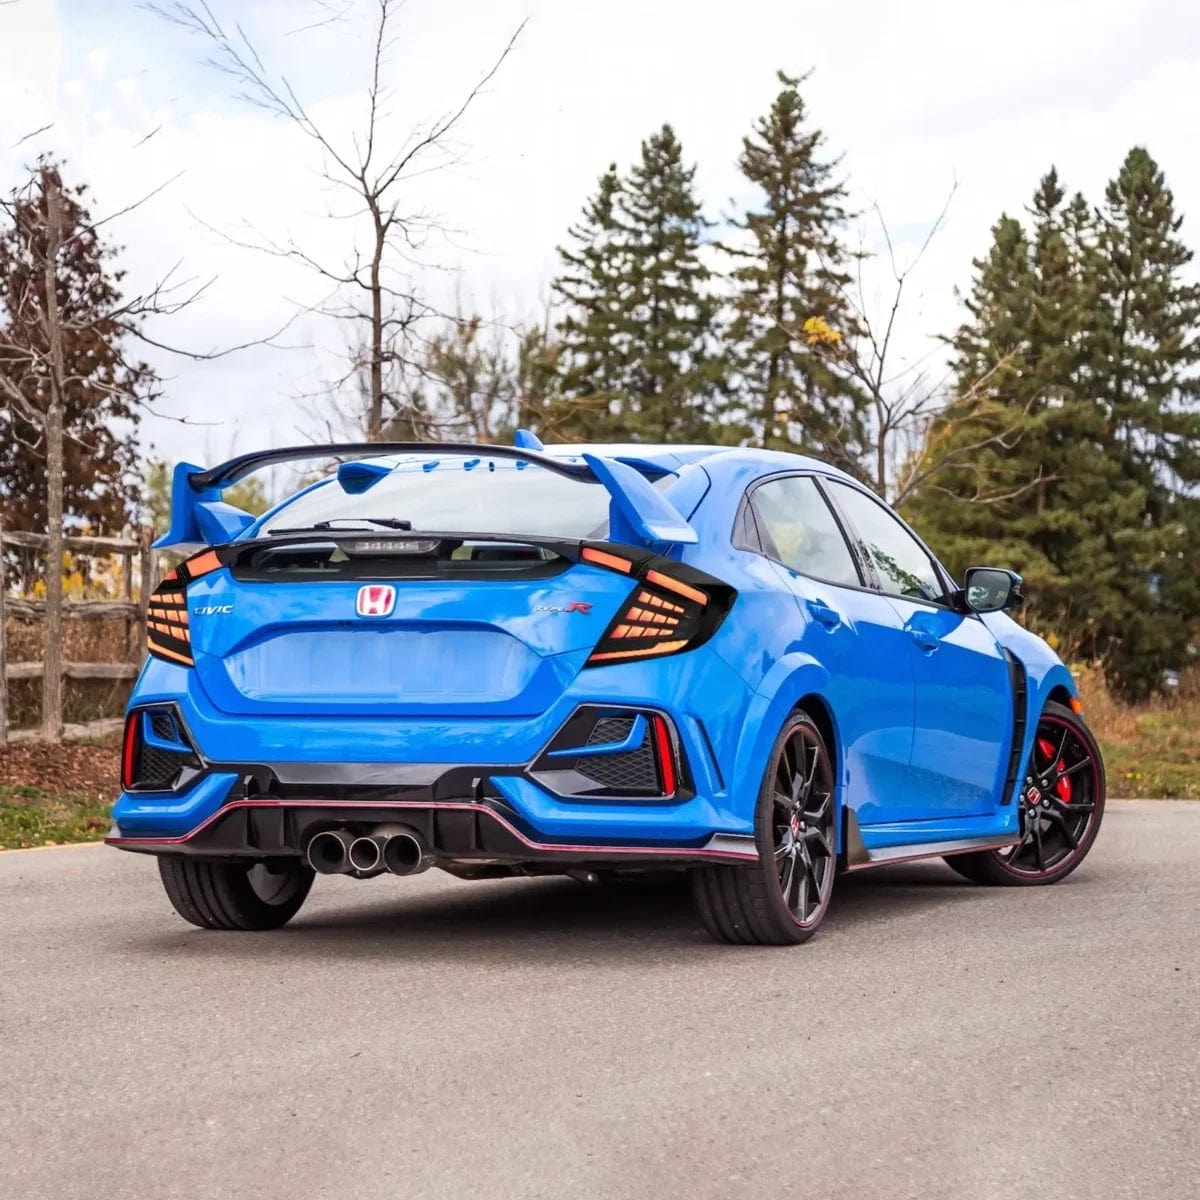 16-21 Honda Civic Hatchback Tail Lights with Dynamic Welcome Lighting - RGB Halo Kits Multicolor Flow Series Color Chasing RGBWA LED headlight kit Oracle Lighting Trendz OneUpLighting Morimoto theretrofitsource AutoLEDTech Diode Dynamics